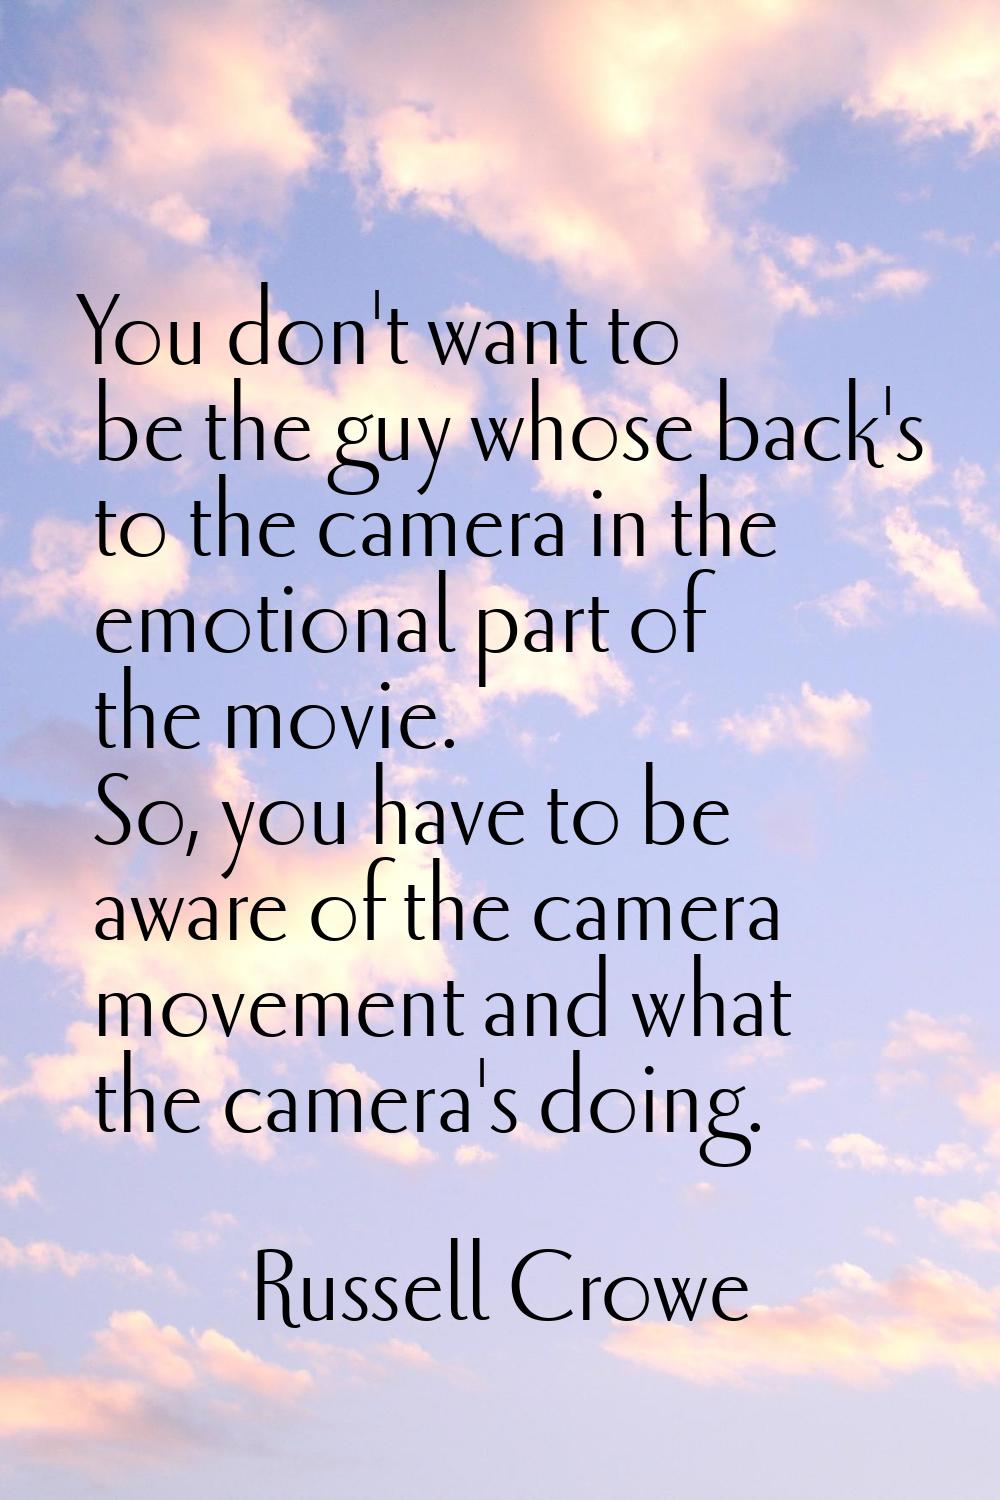 You don't want to be the guy whose back's to the camera in the emotional part of the movie. So, you